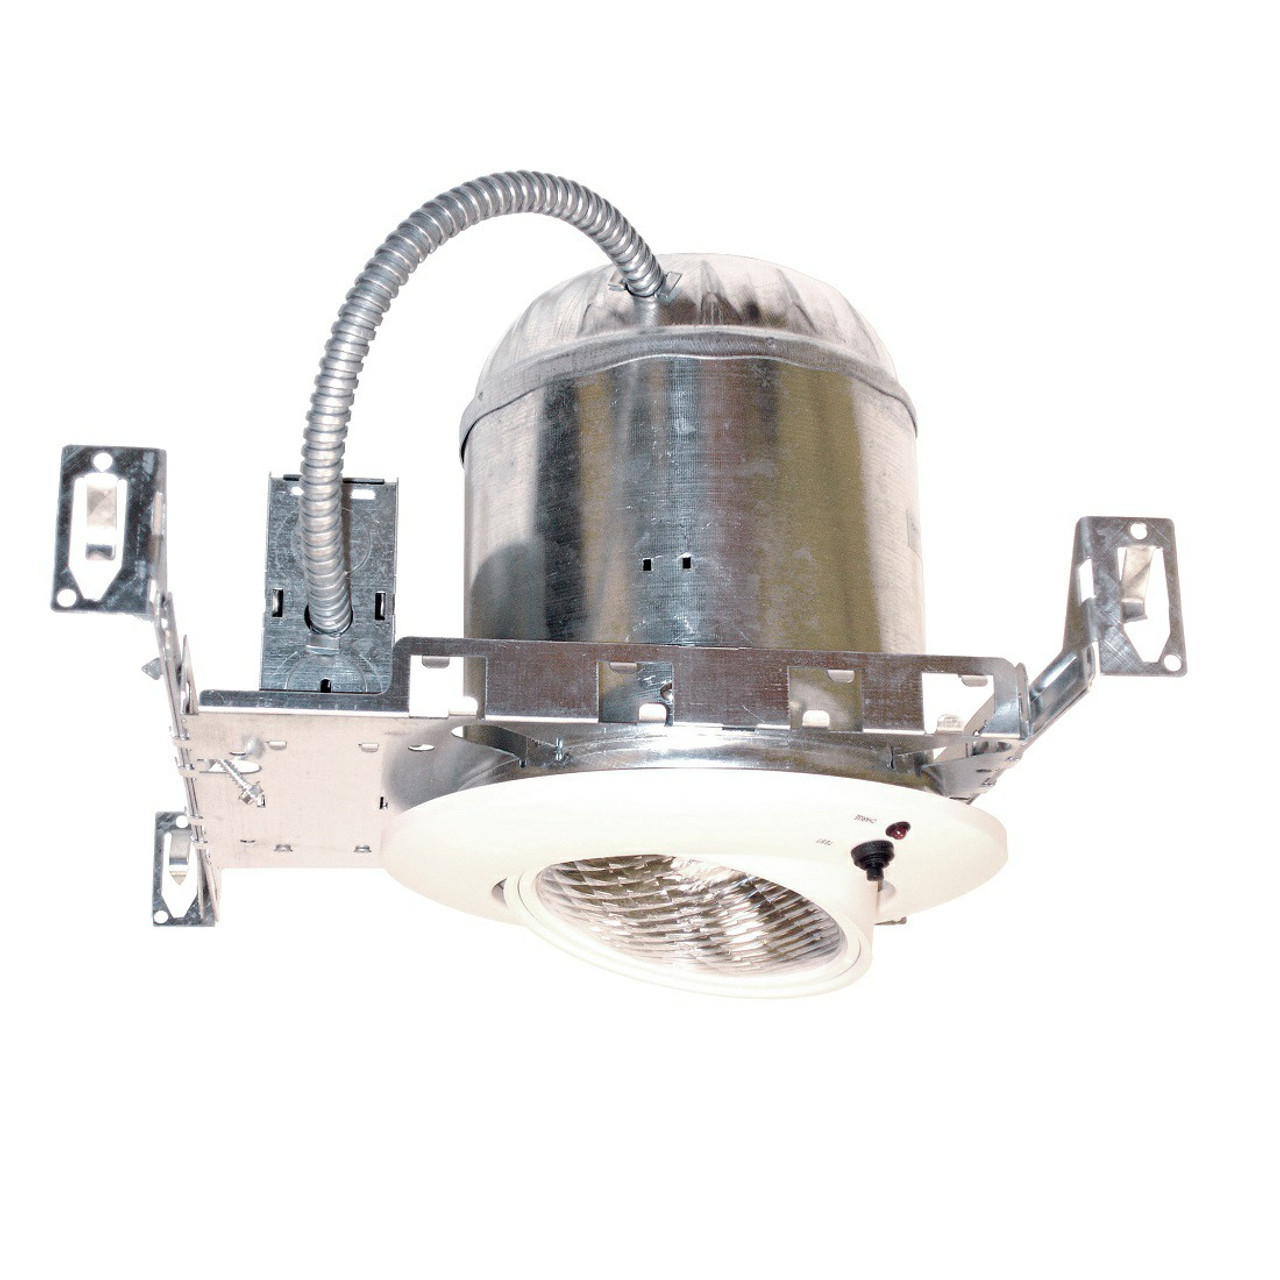 INCANDESCENT ADJUSTABLE RECESSED DOWNLIGHT EMERGENCY UNIT EMRL-1 
 
Adjustable ultra bright 8 watt bi-pin halogen lamp in a gimbal trim.
Sealed beam PAR36-type gimbal trim with smooth chrome-plated metalized reflector and plastic lens offers optimal light distribution.
Dual 120/277 voltage.
Charge rate/power “ON” LED indicator light and push-to-test switch for mandated code compliance testing.
LVD (low voltage disconnect) prevents battery from deep discharge.
6V maintenance-free, rechargeable sealed lead acid battery.
Internal solid-state transfer switch automatically connects the internal battery to LED board for minimum 90-minute emergency illumination.
Fully automatic solid-state, two rate charger initiates battery charging to recharge a discharged battery in 24 hours.
Compatible with drop ceiling mount installations. Bar hangers included.